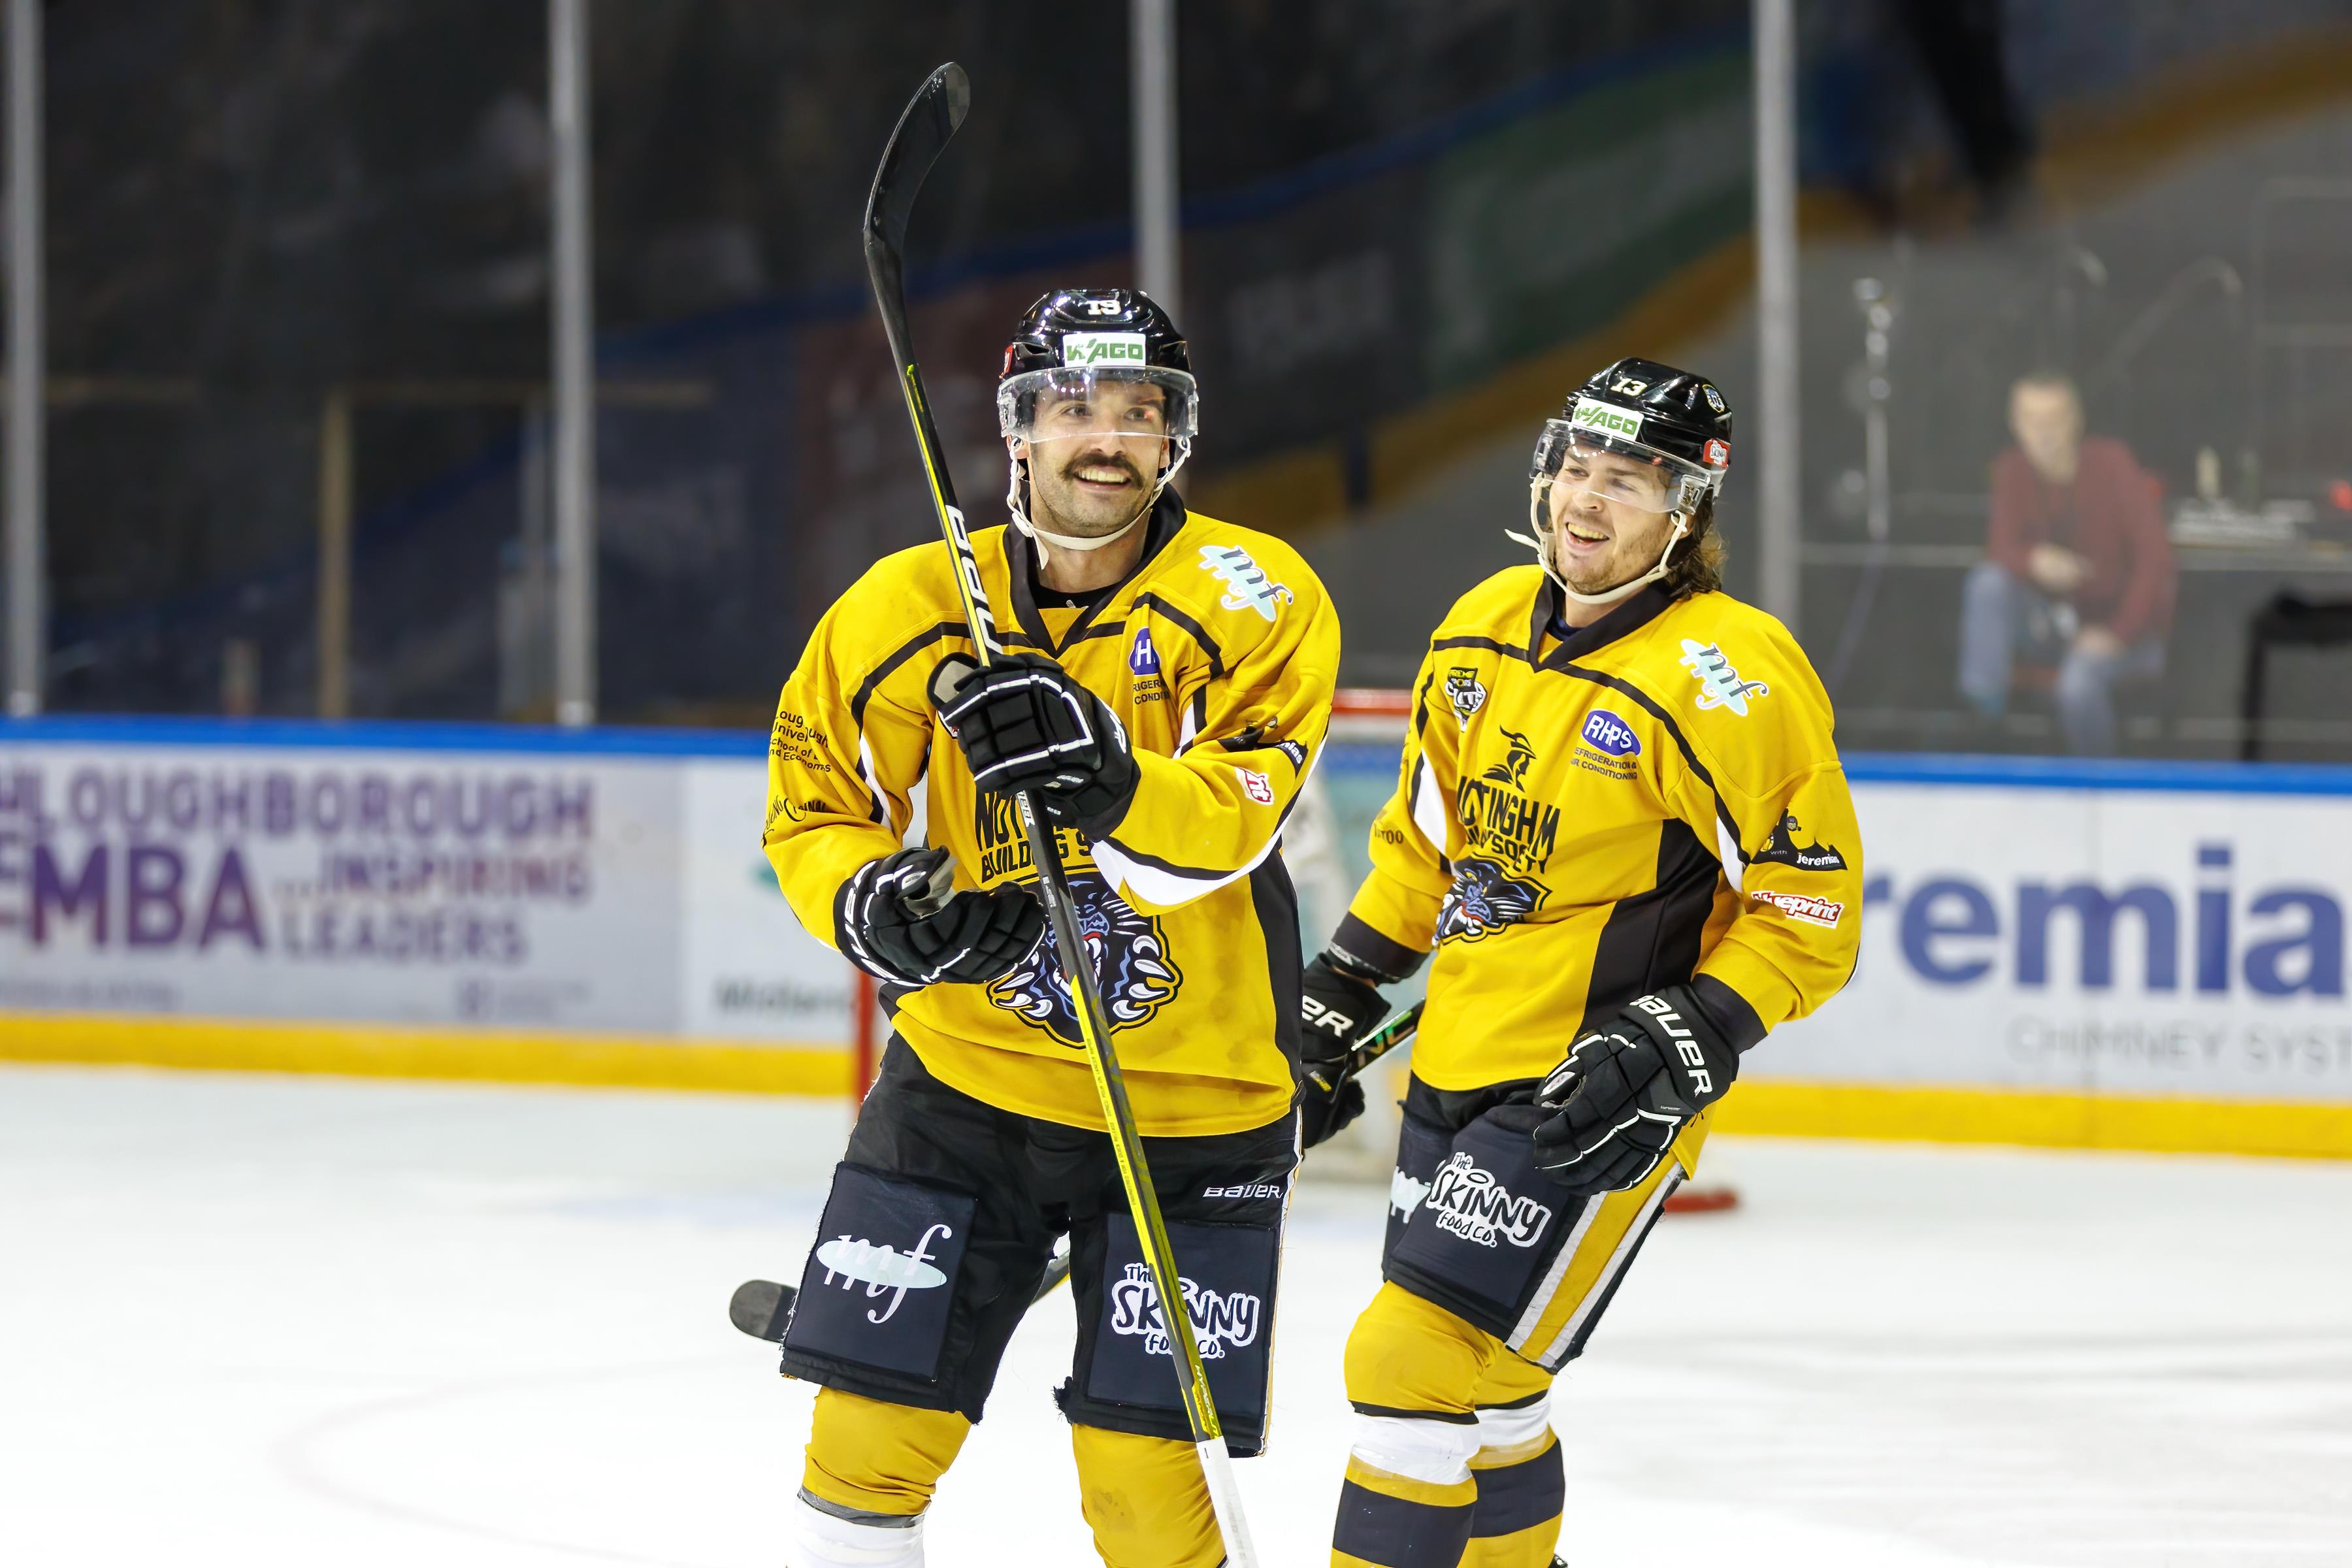 FERRARA'S RELIEF FOR FIRST PANTHERS GOAL Top Image